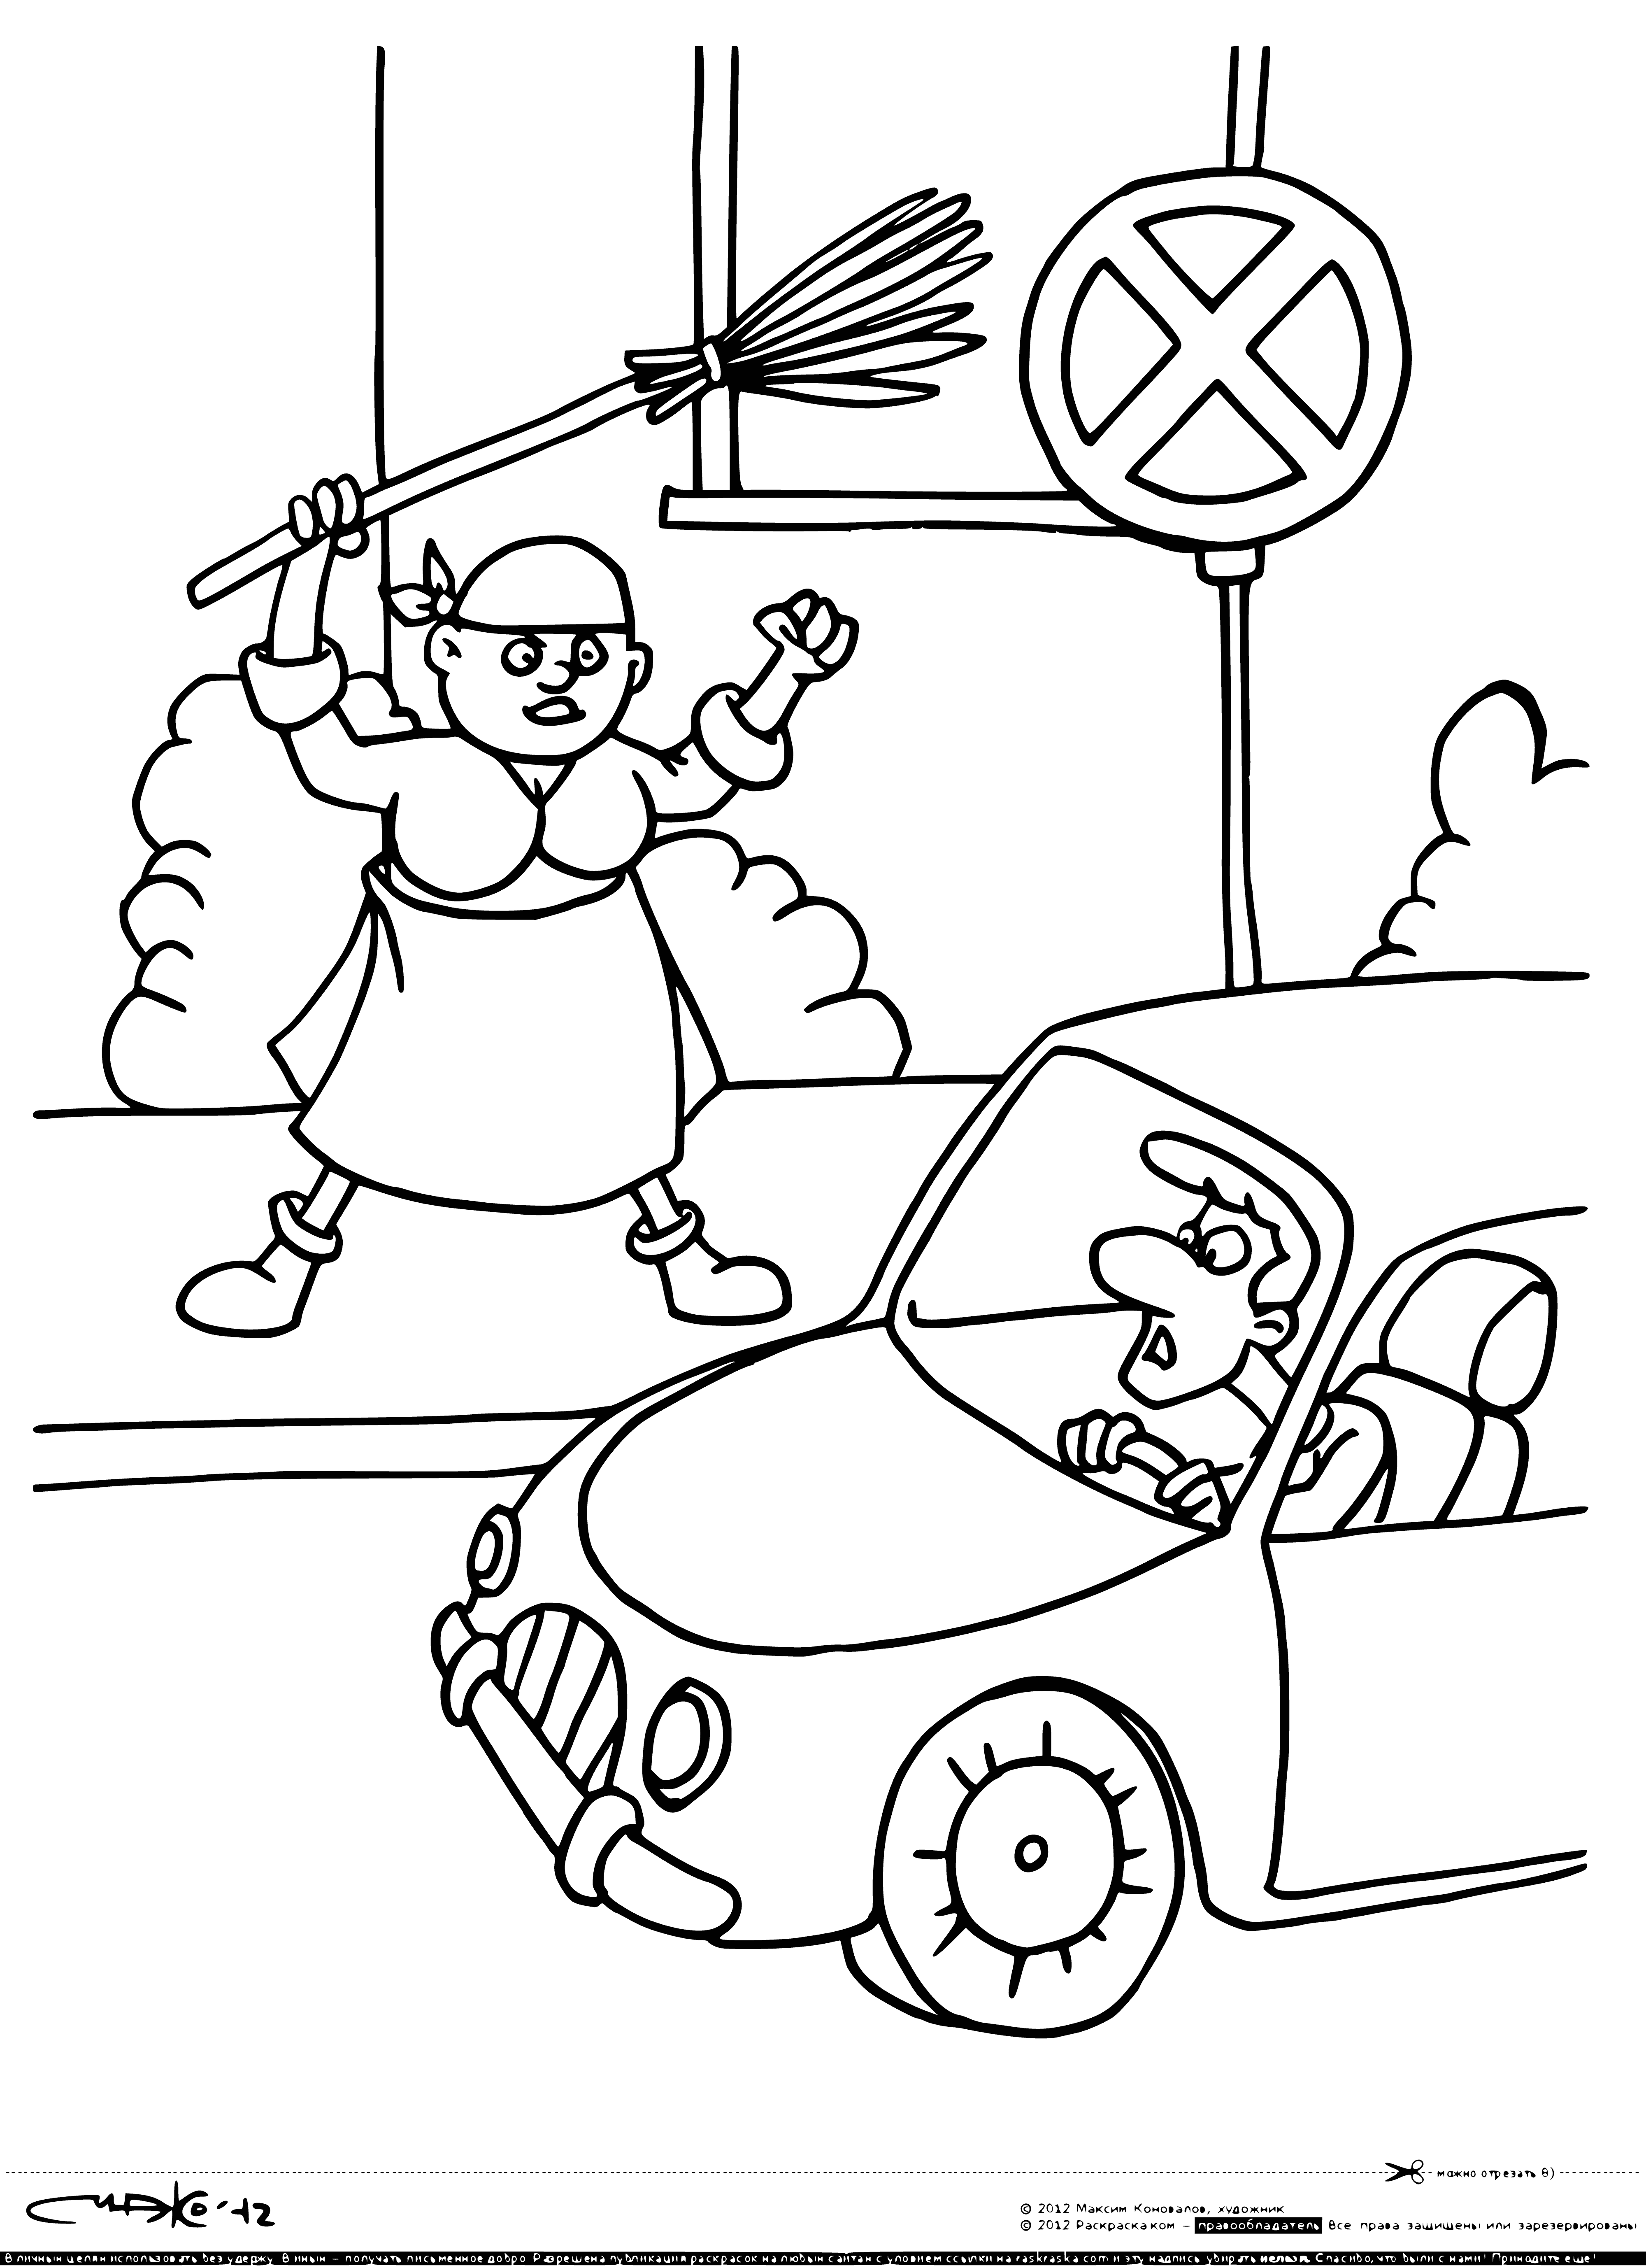 coloring page: No stopping allowed on this road. Sign informs drivers not to stop.